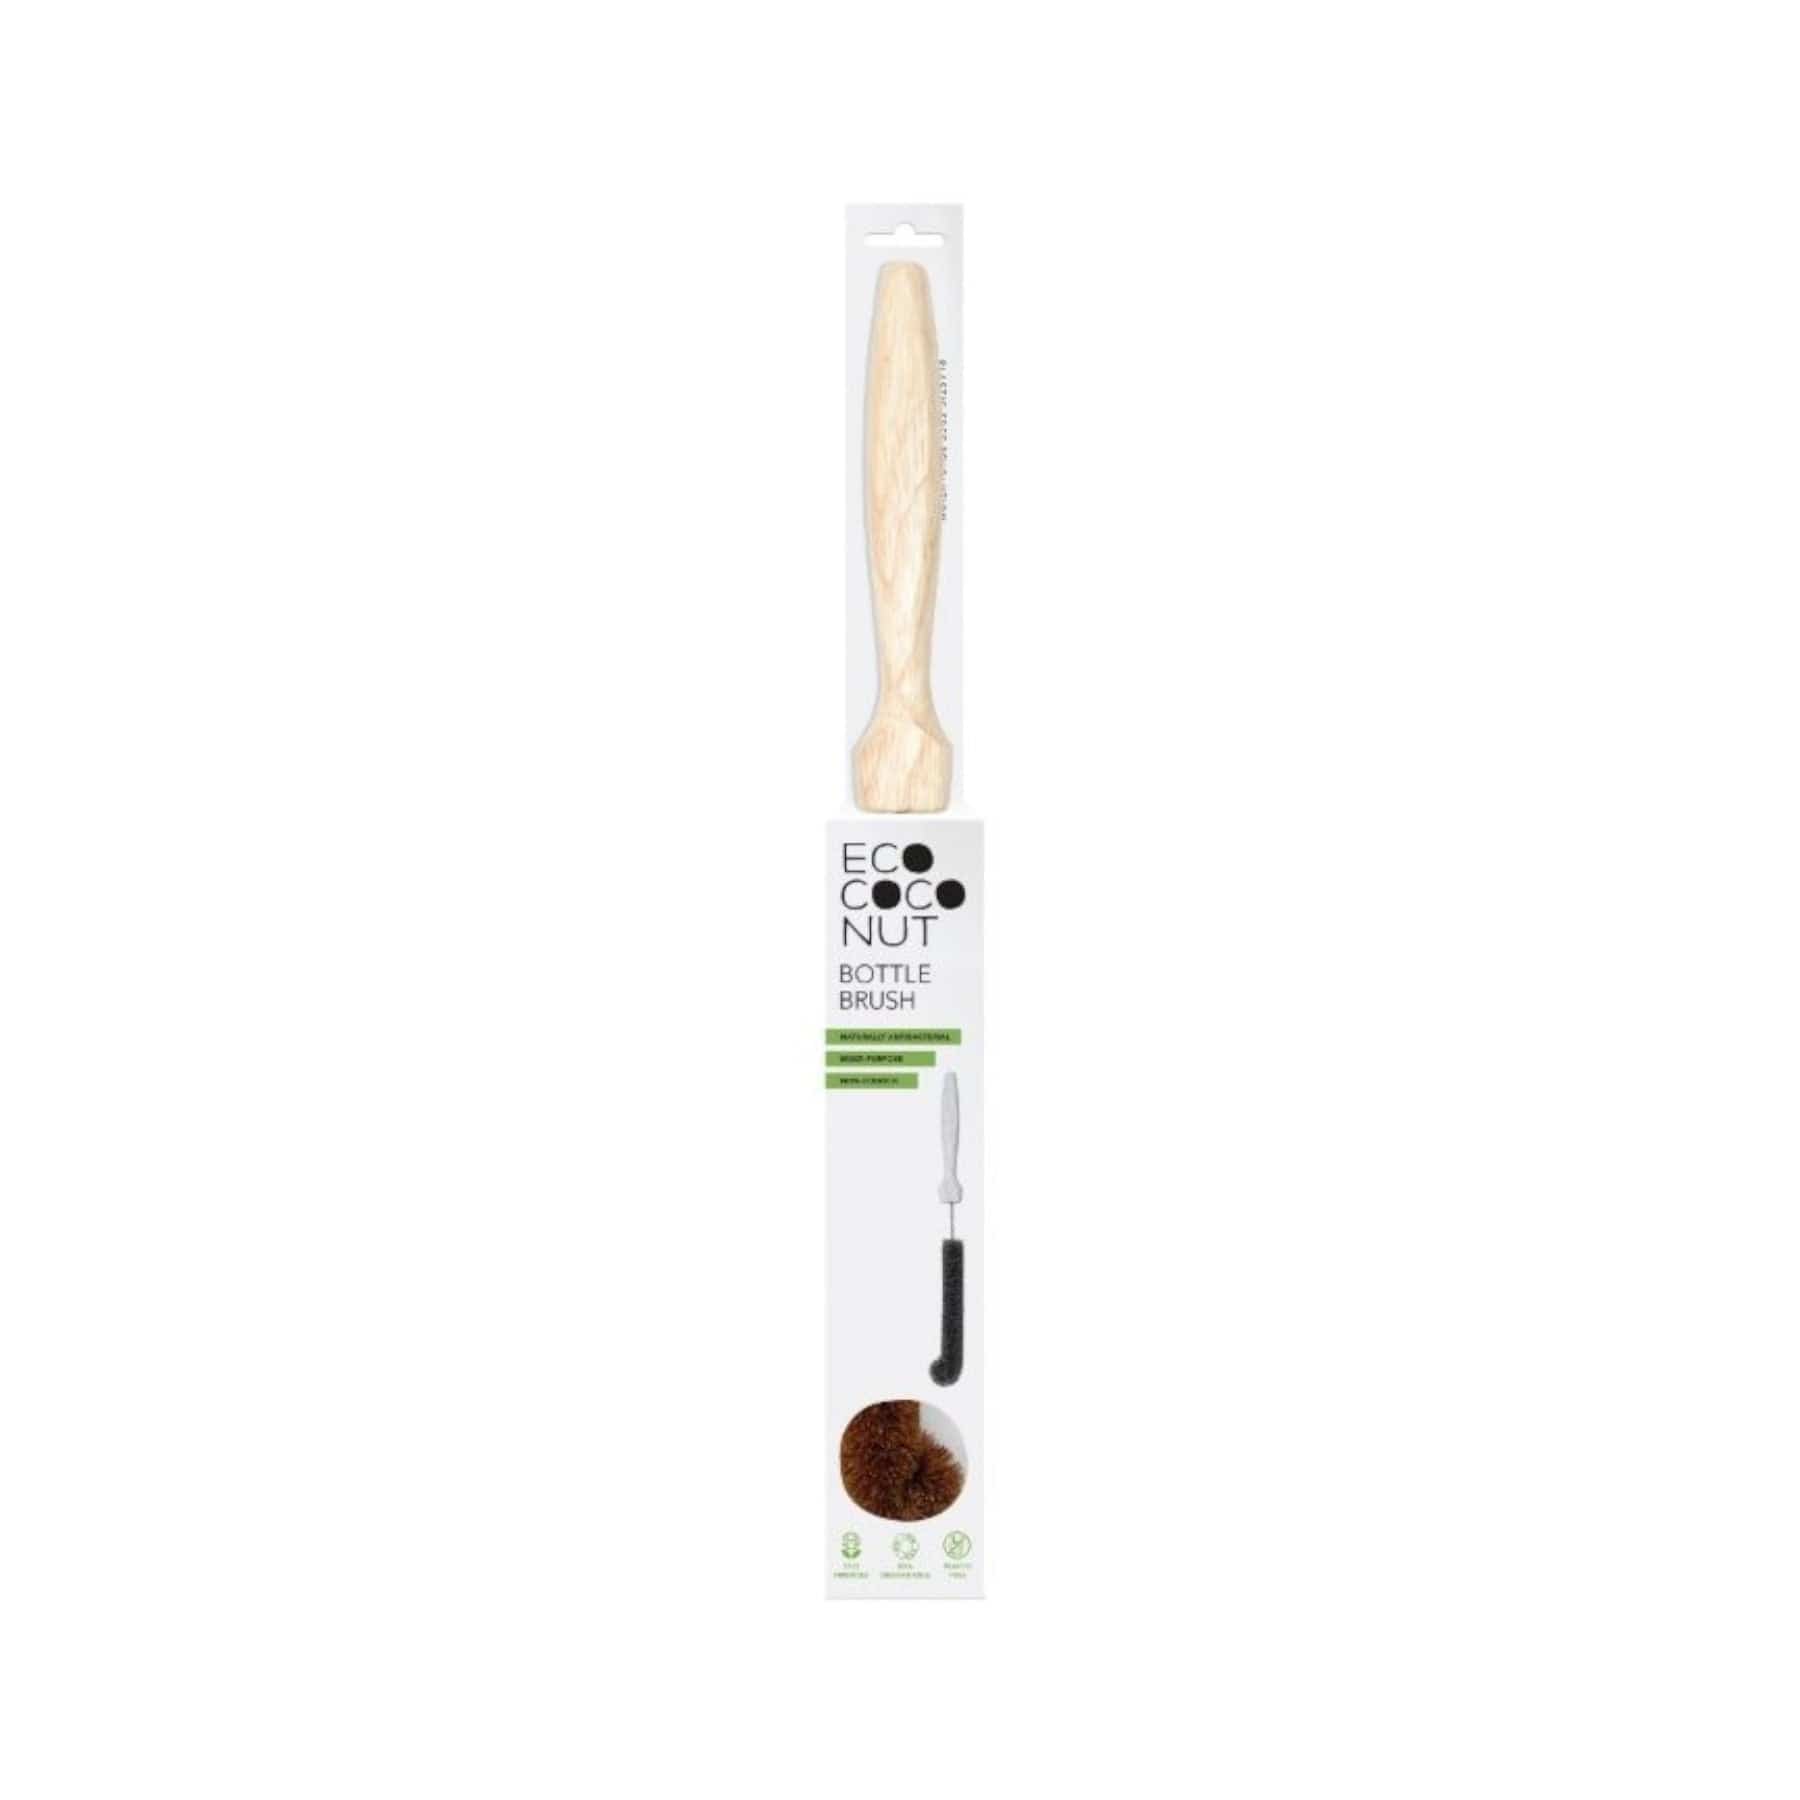 Eco-friendly coconut fiber bottle brush with ergonomic wooden handle, sustainable cleaning tool, packaged in cardboard.